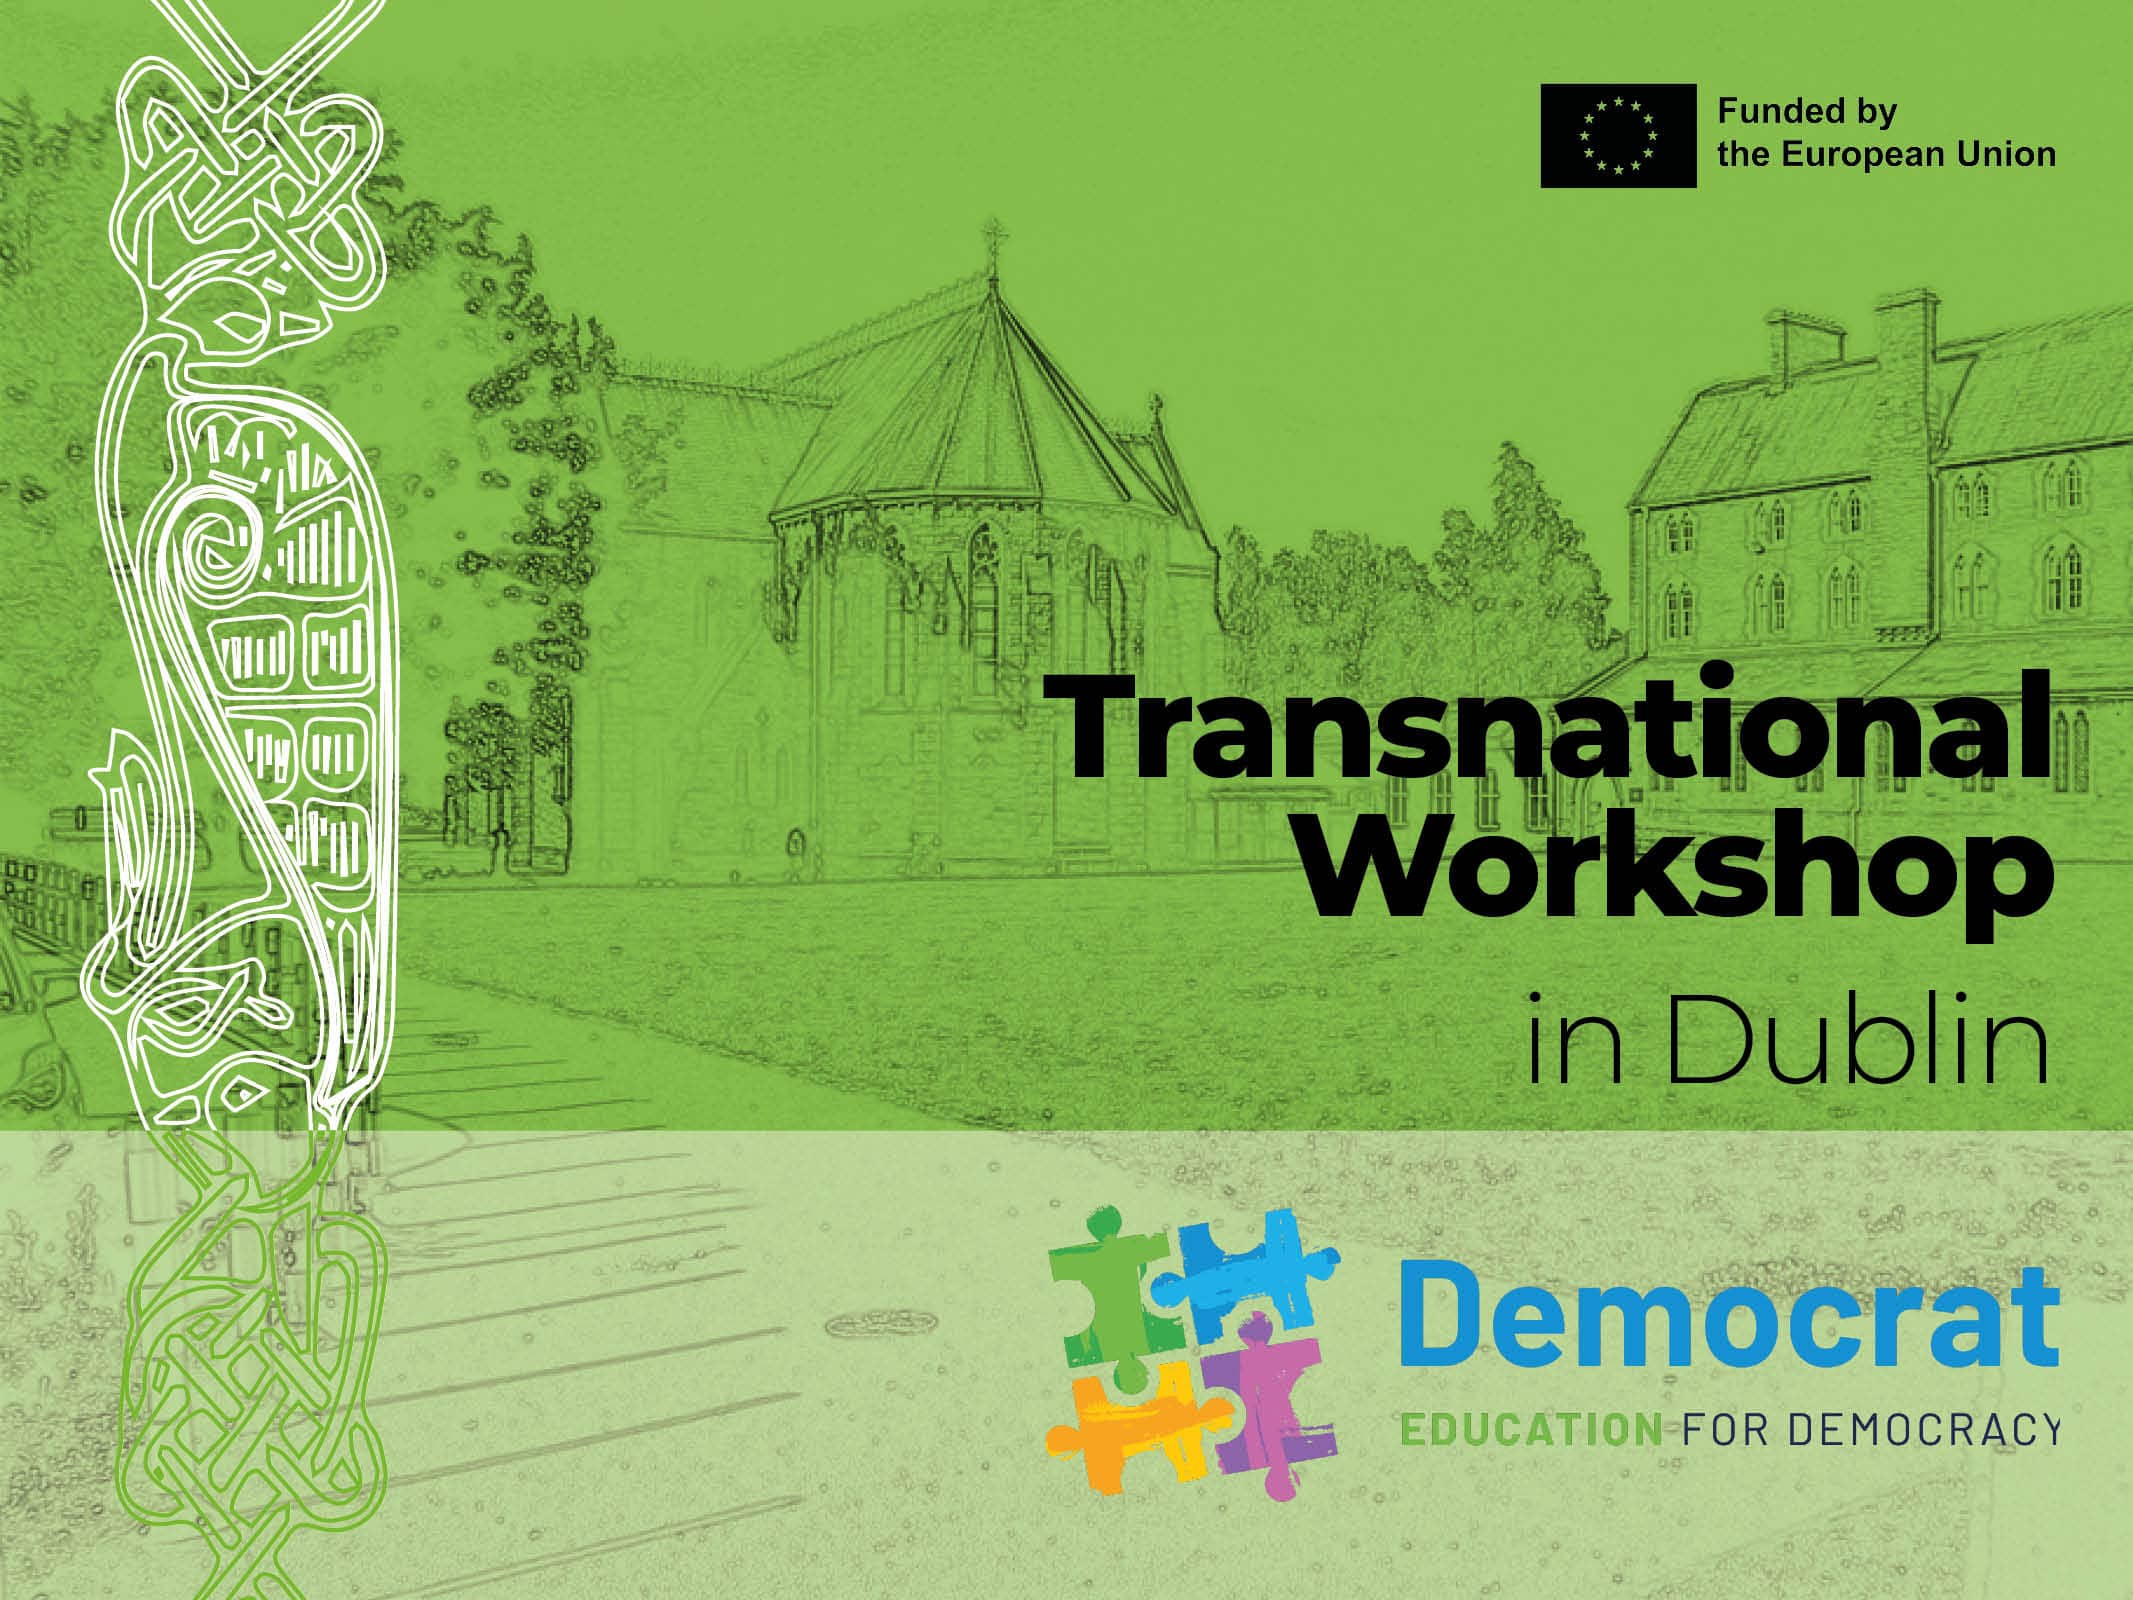 DCU All Hallows Campus Purcel House, a key location for the Transnational DEMOCRAT Workshop on democratic education